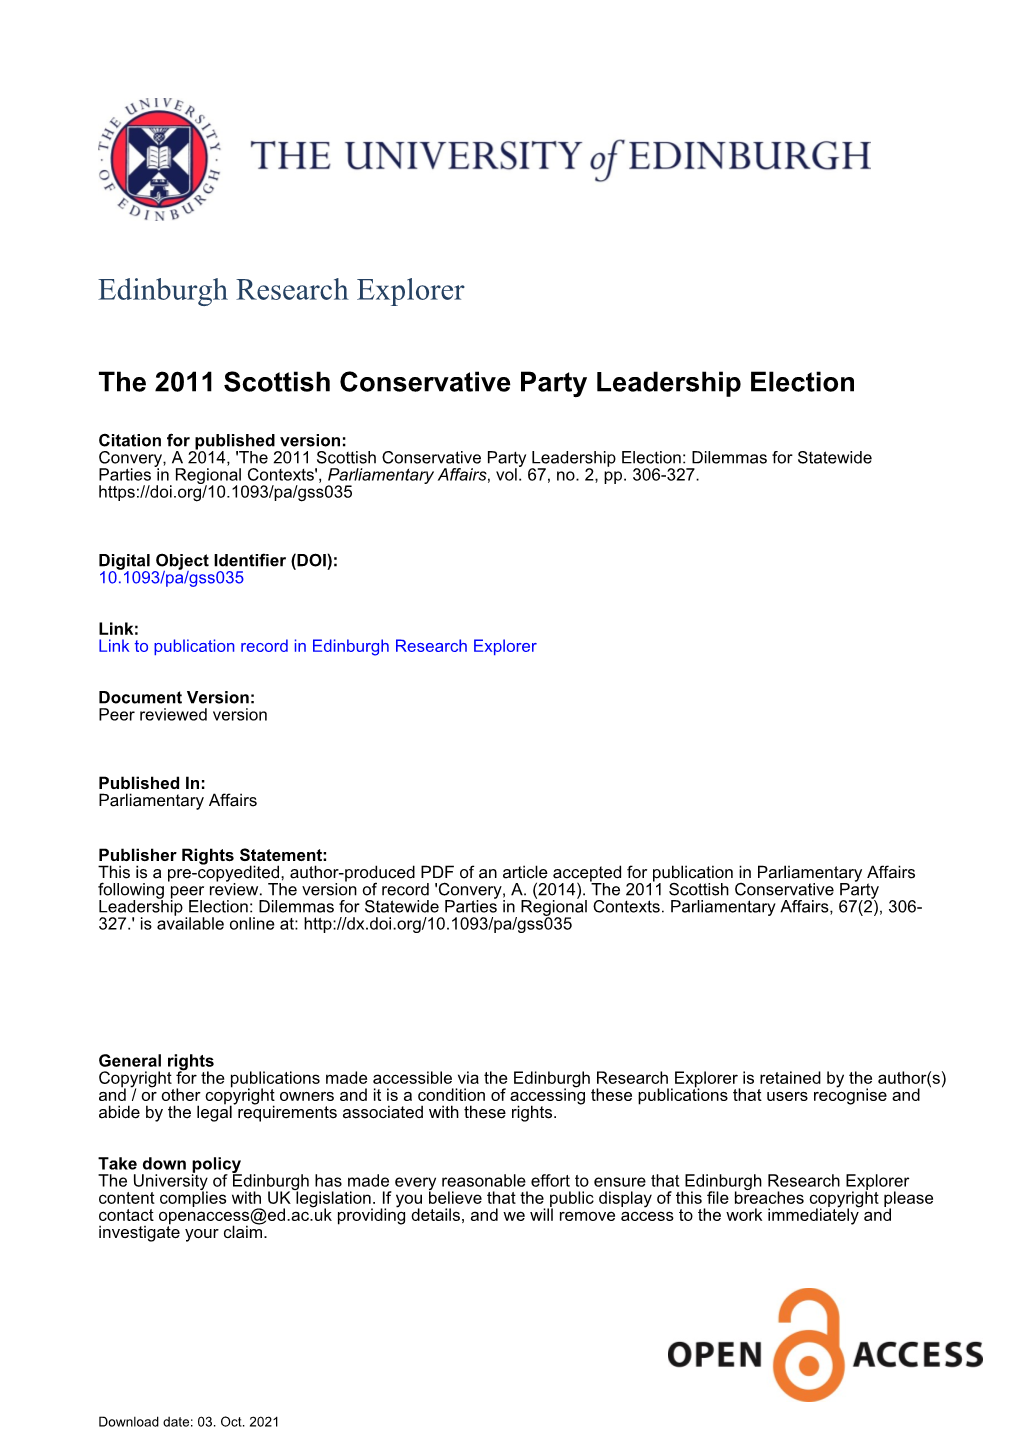 The 2011 Scottish Conservative Party Leadership Election